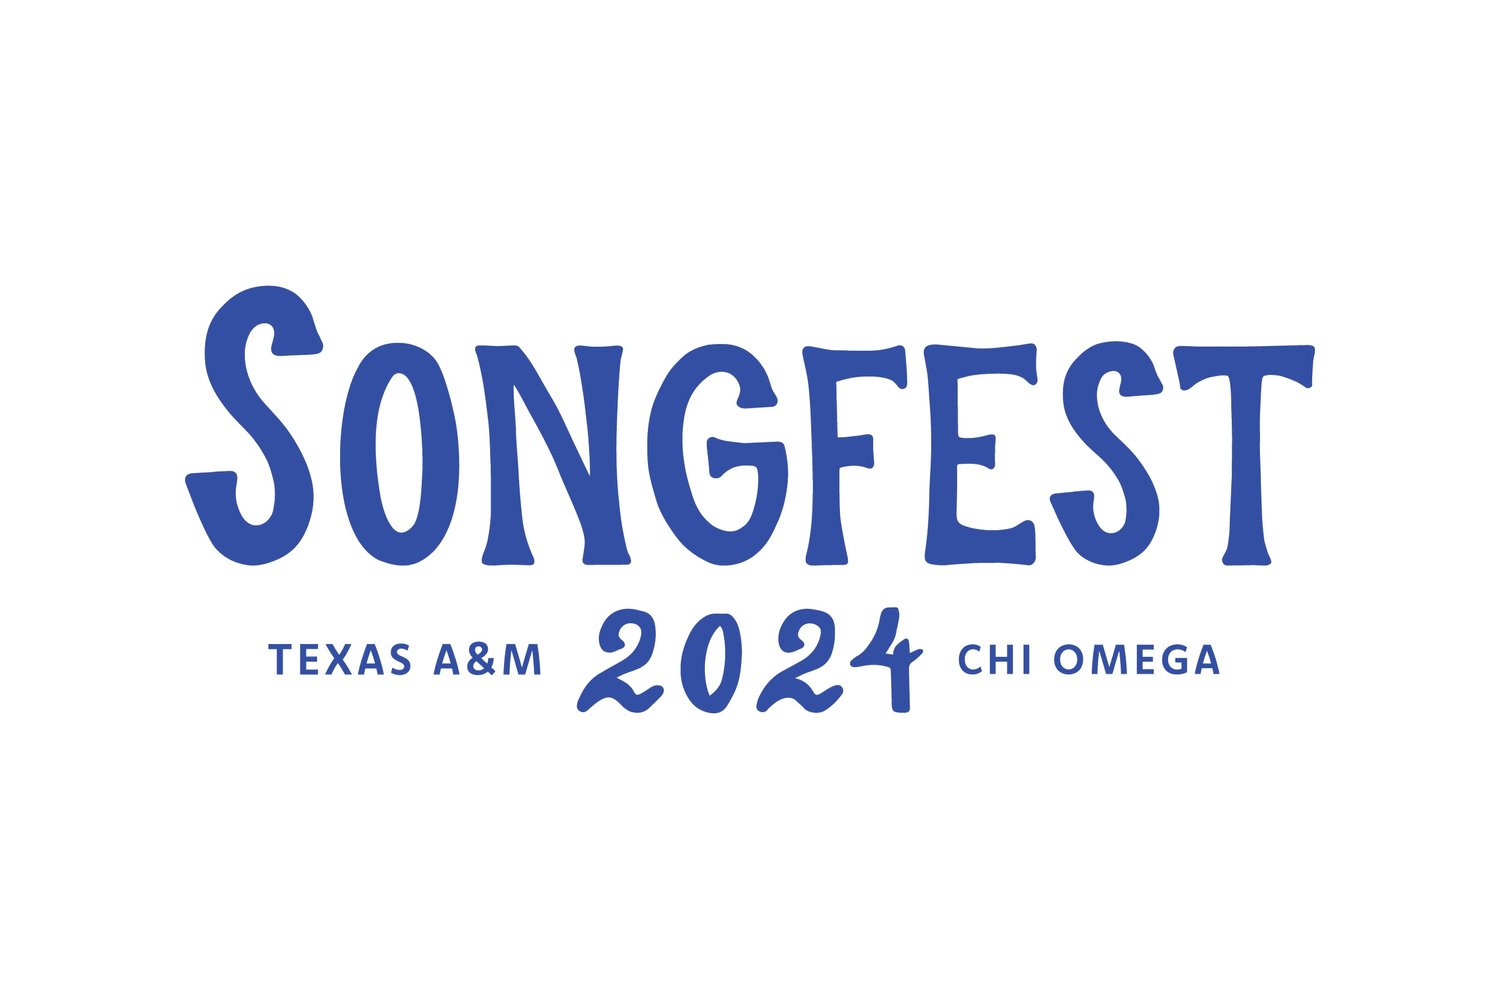 Texas A&M® Chi Omega Songfest